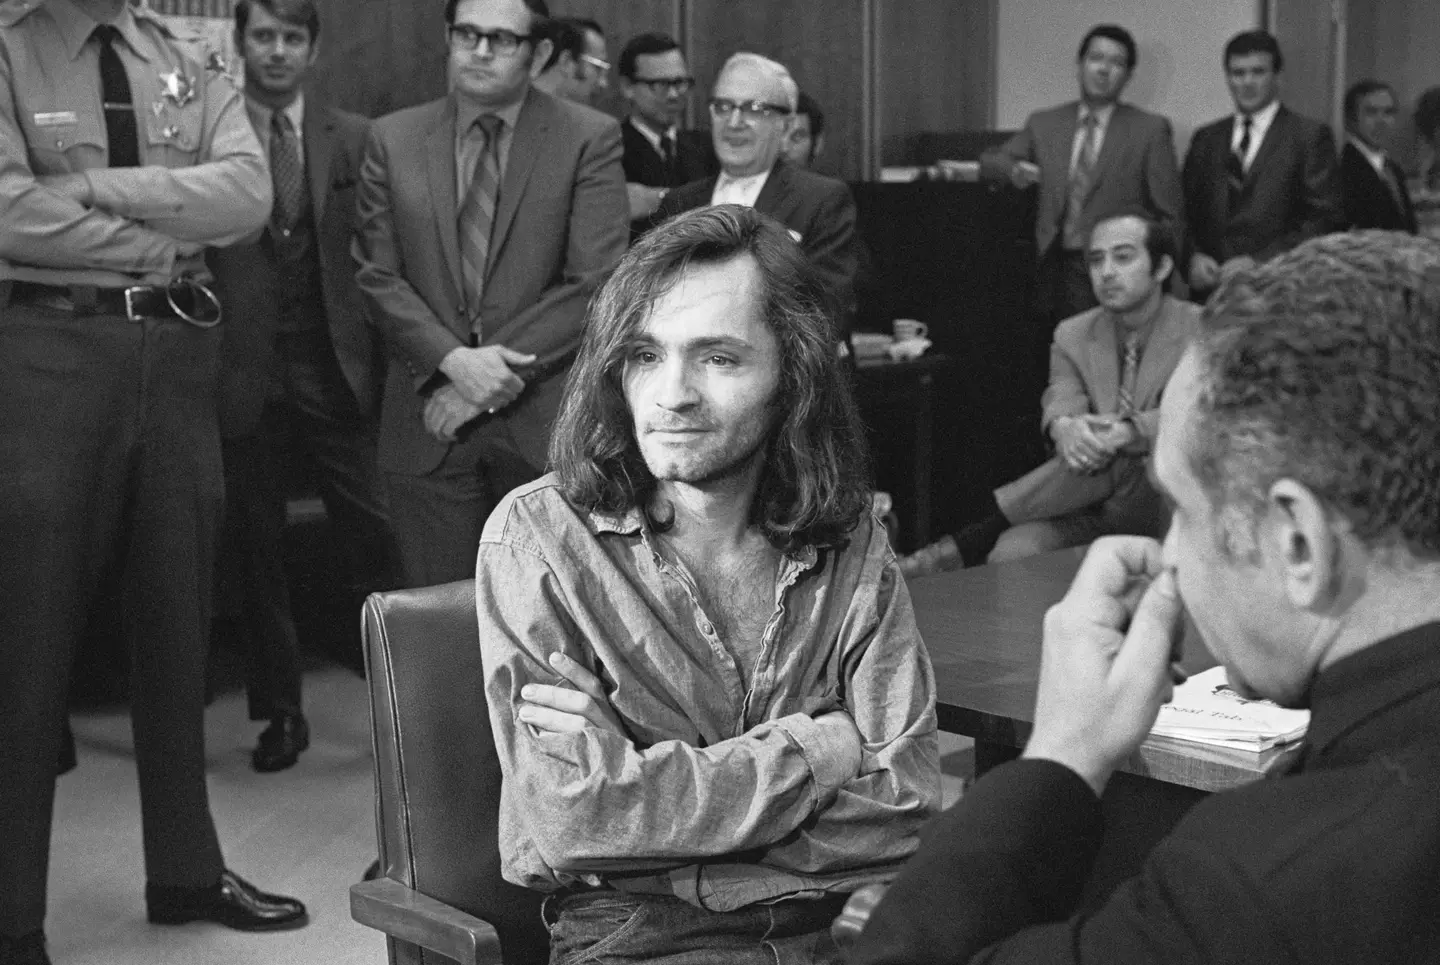 Charles Manson during his 1970 trial (Bettmann/Getty Images)